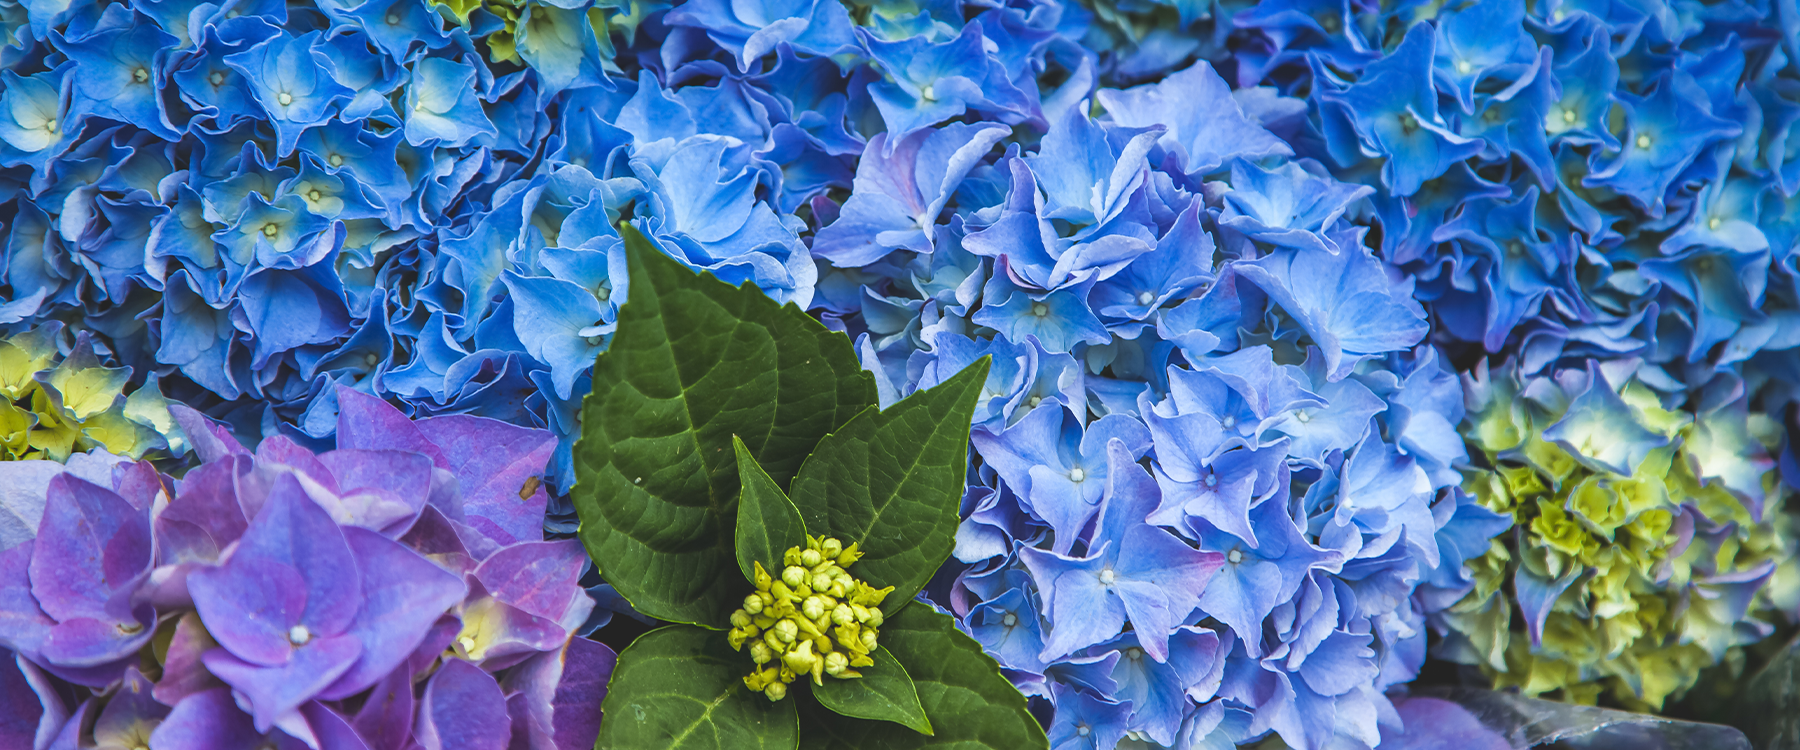 6 Popular Types of Hydrangea For A Blooming Garden